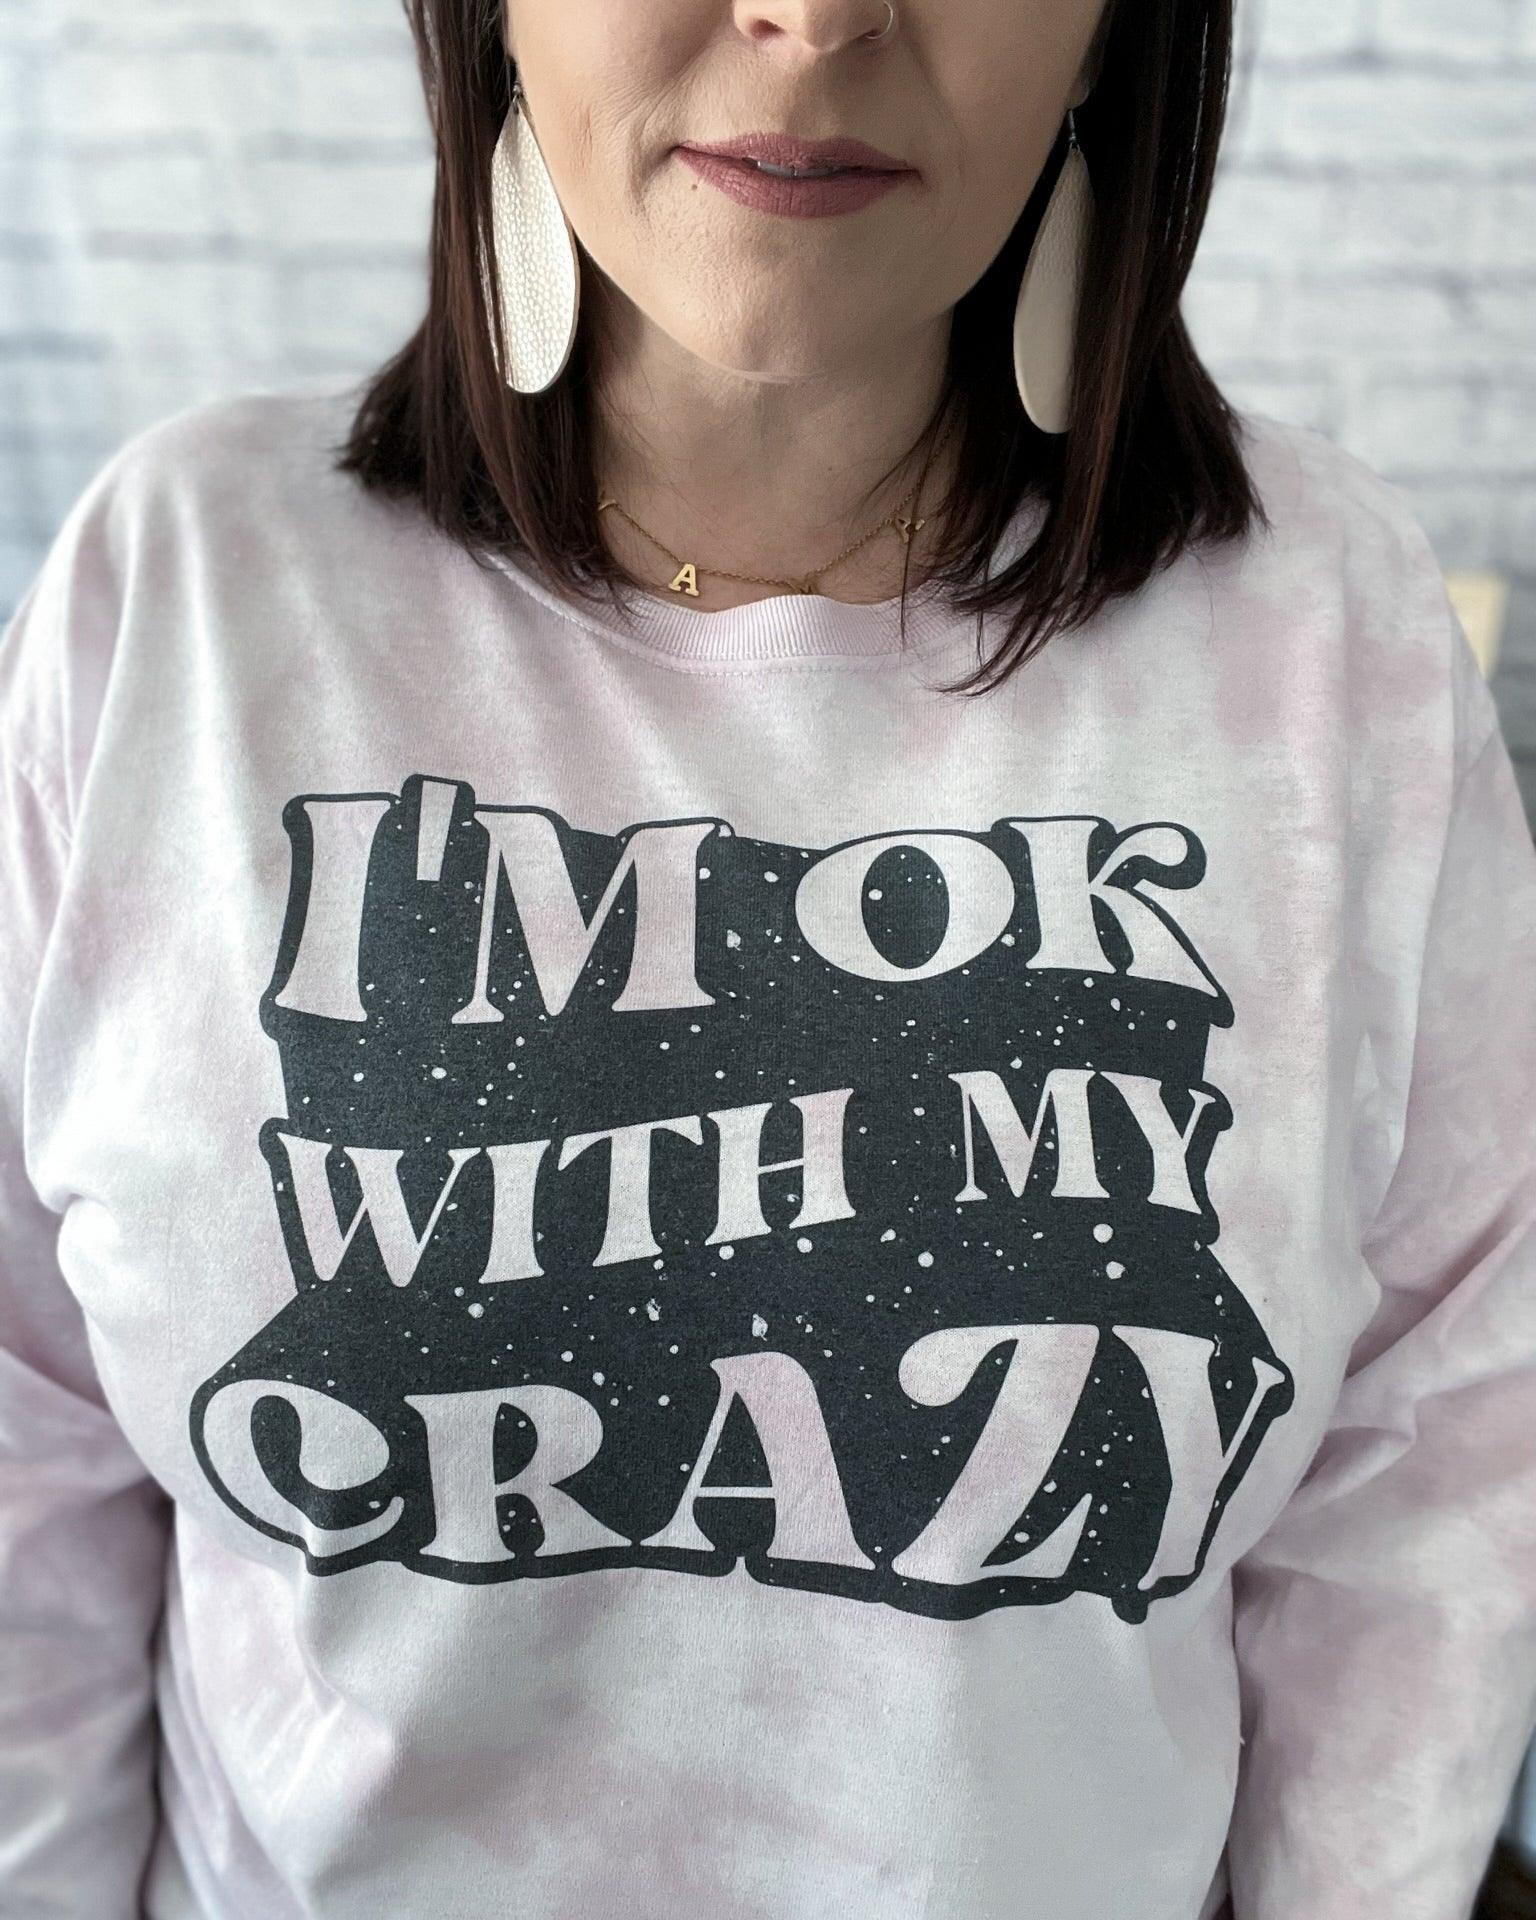 I'm Ok With My Crazy - Women's shirts -  Rustic Cuts